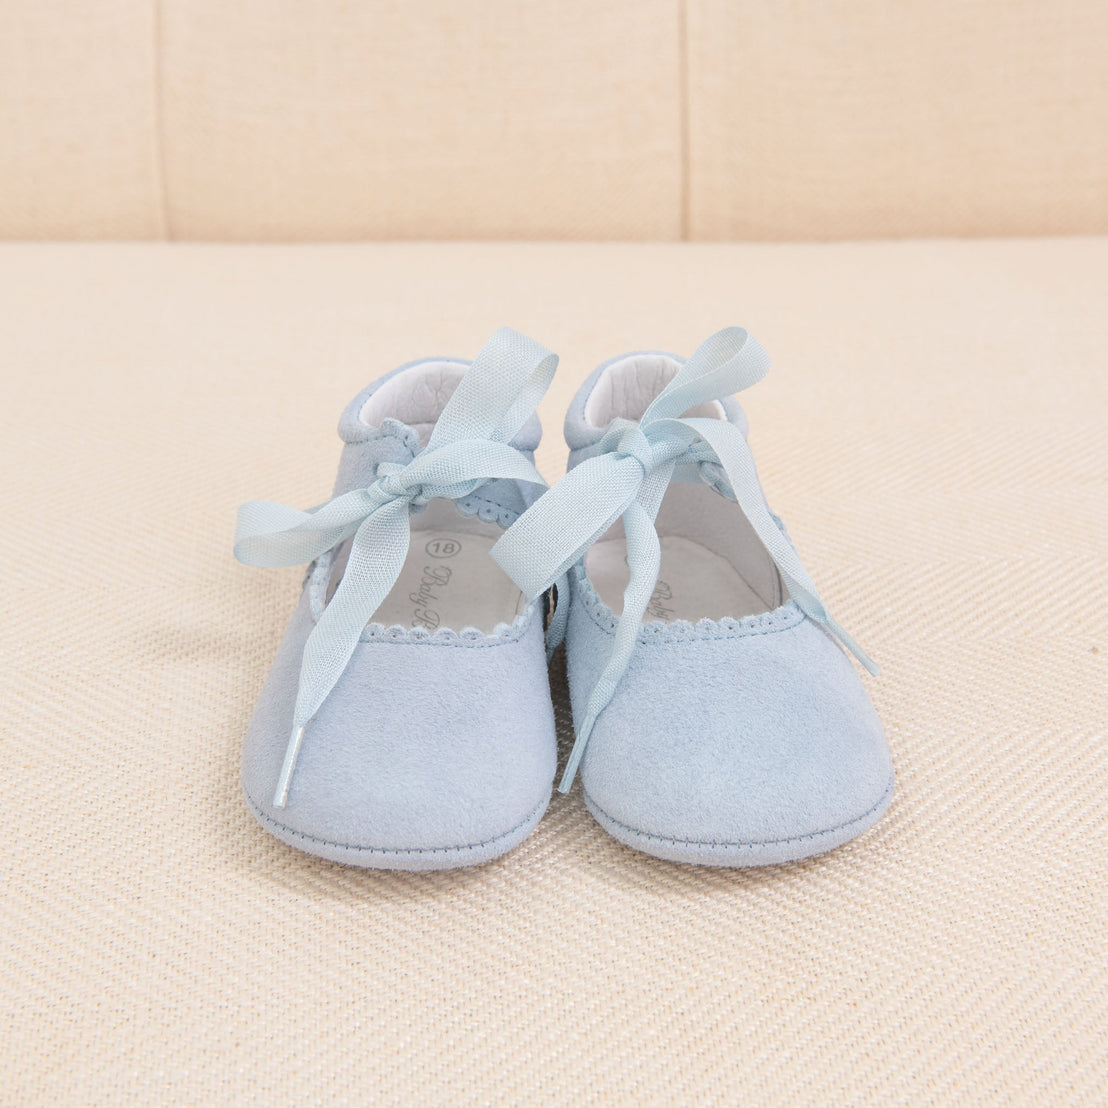 A pair of small, light blue Isla Suede Tie Mary Janes with ribbon ties on a beige textured background, conveying a soft and delicate appearance.